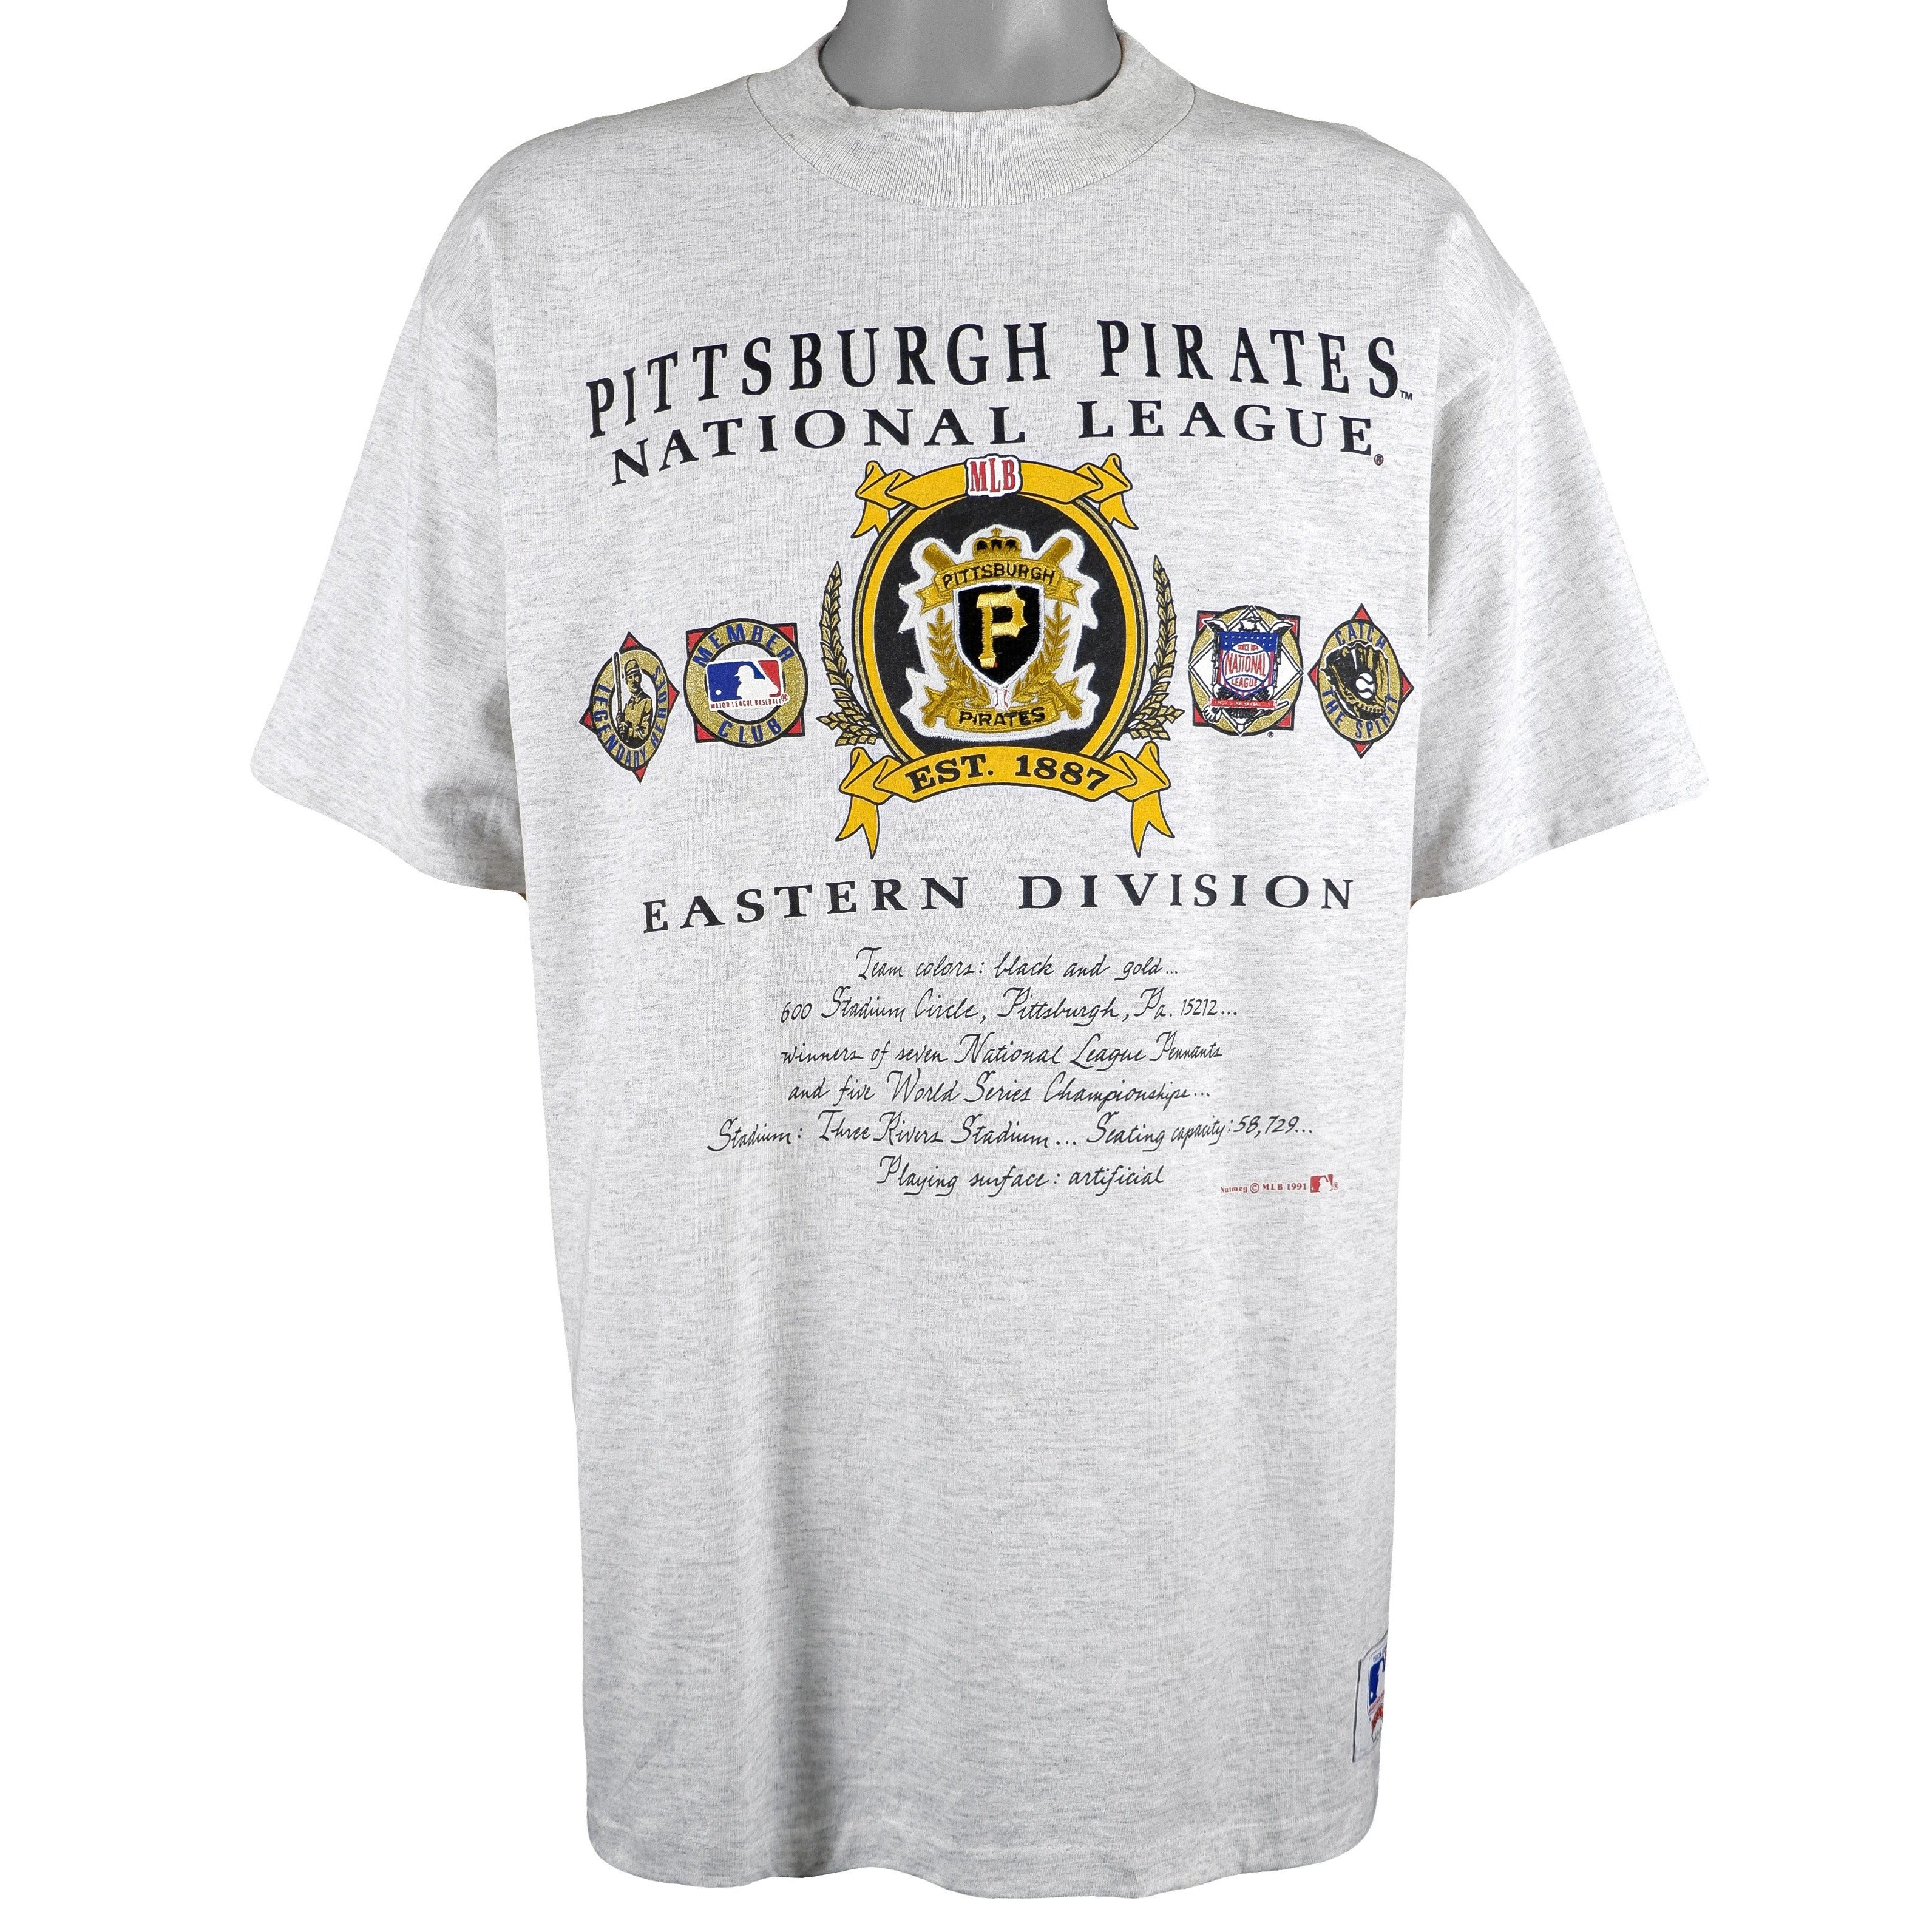 VINTAGE MLB PITTSBURGH PIRATES TEE SHIRT 1991 SIZE LARGE MADE IN